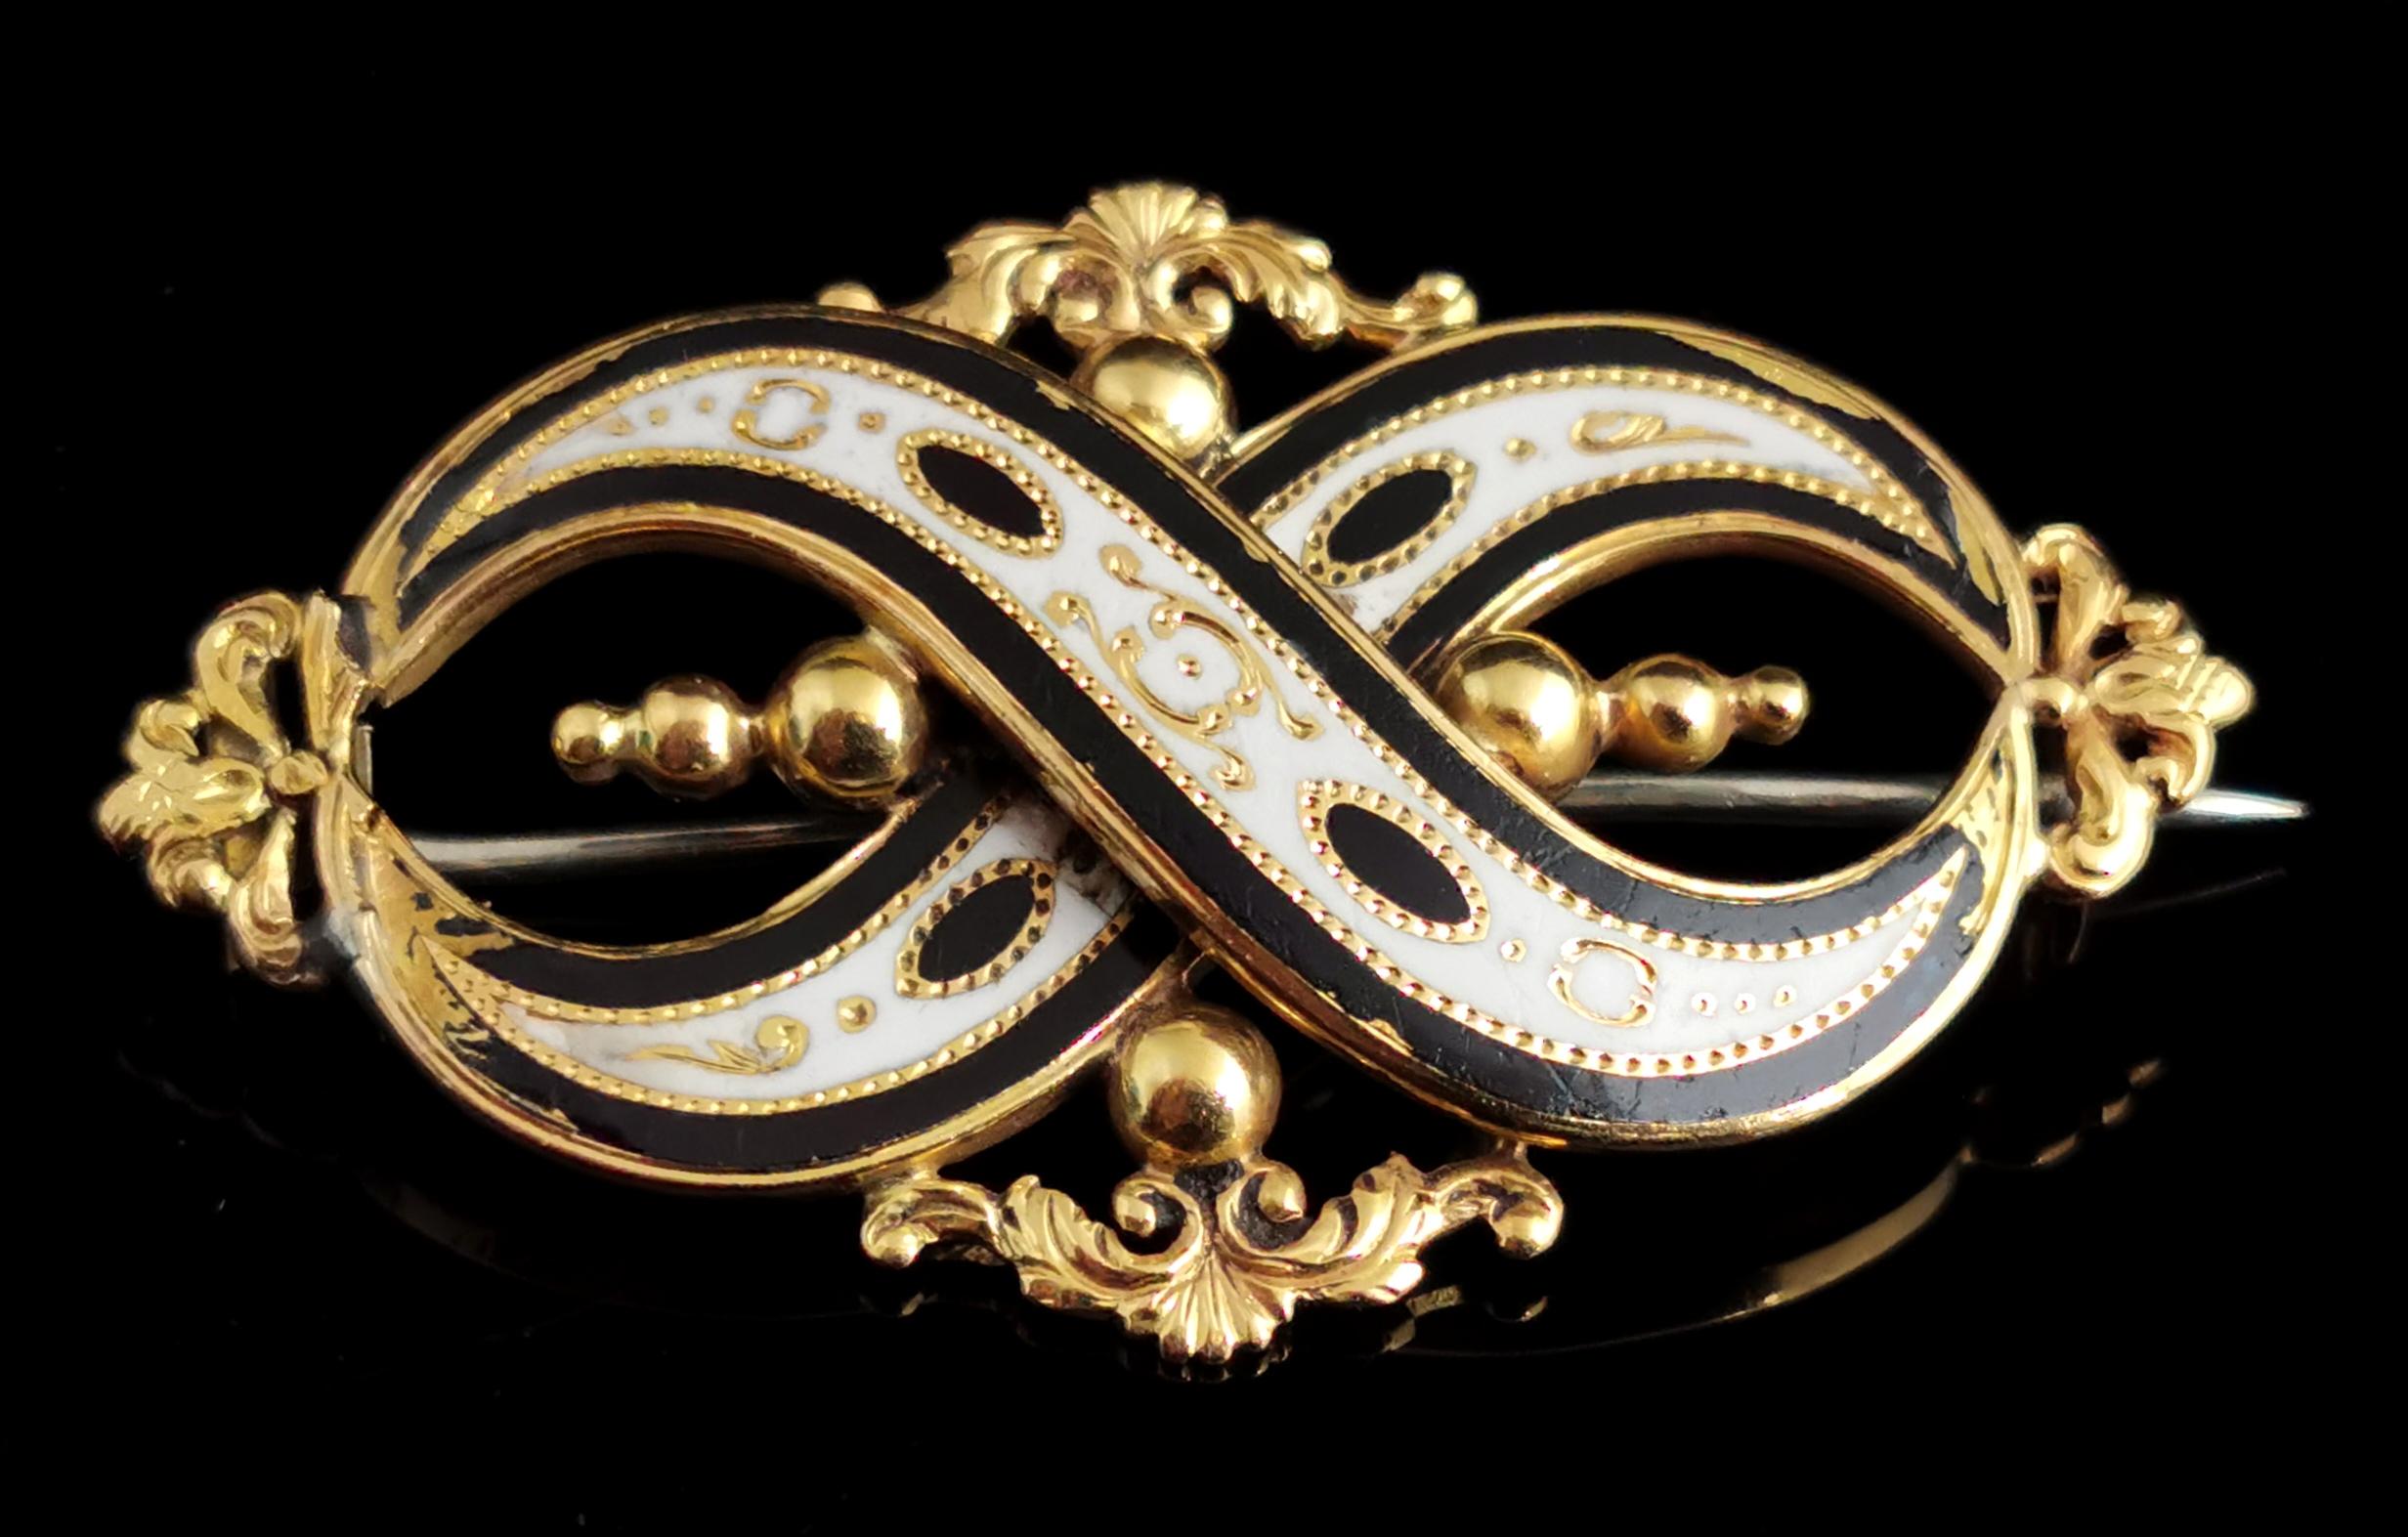 A stunning antique, late Victorian 15kt yellow gold and enamelled mourning brooch.

A very elegant and elaborate design the brooch features two overlapping arches joined each end to form an infinity symbol.

Symbolising remembering someone